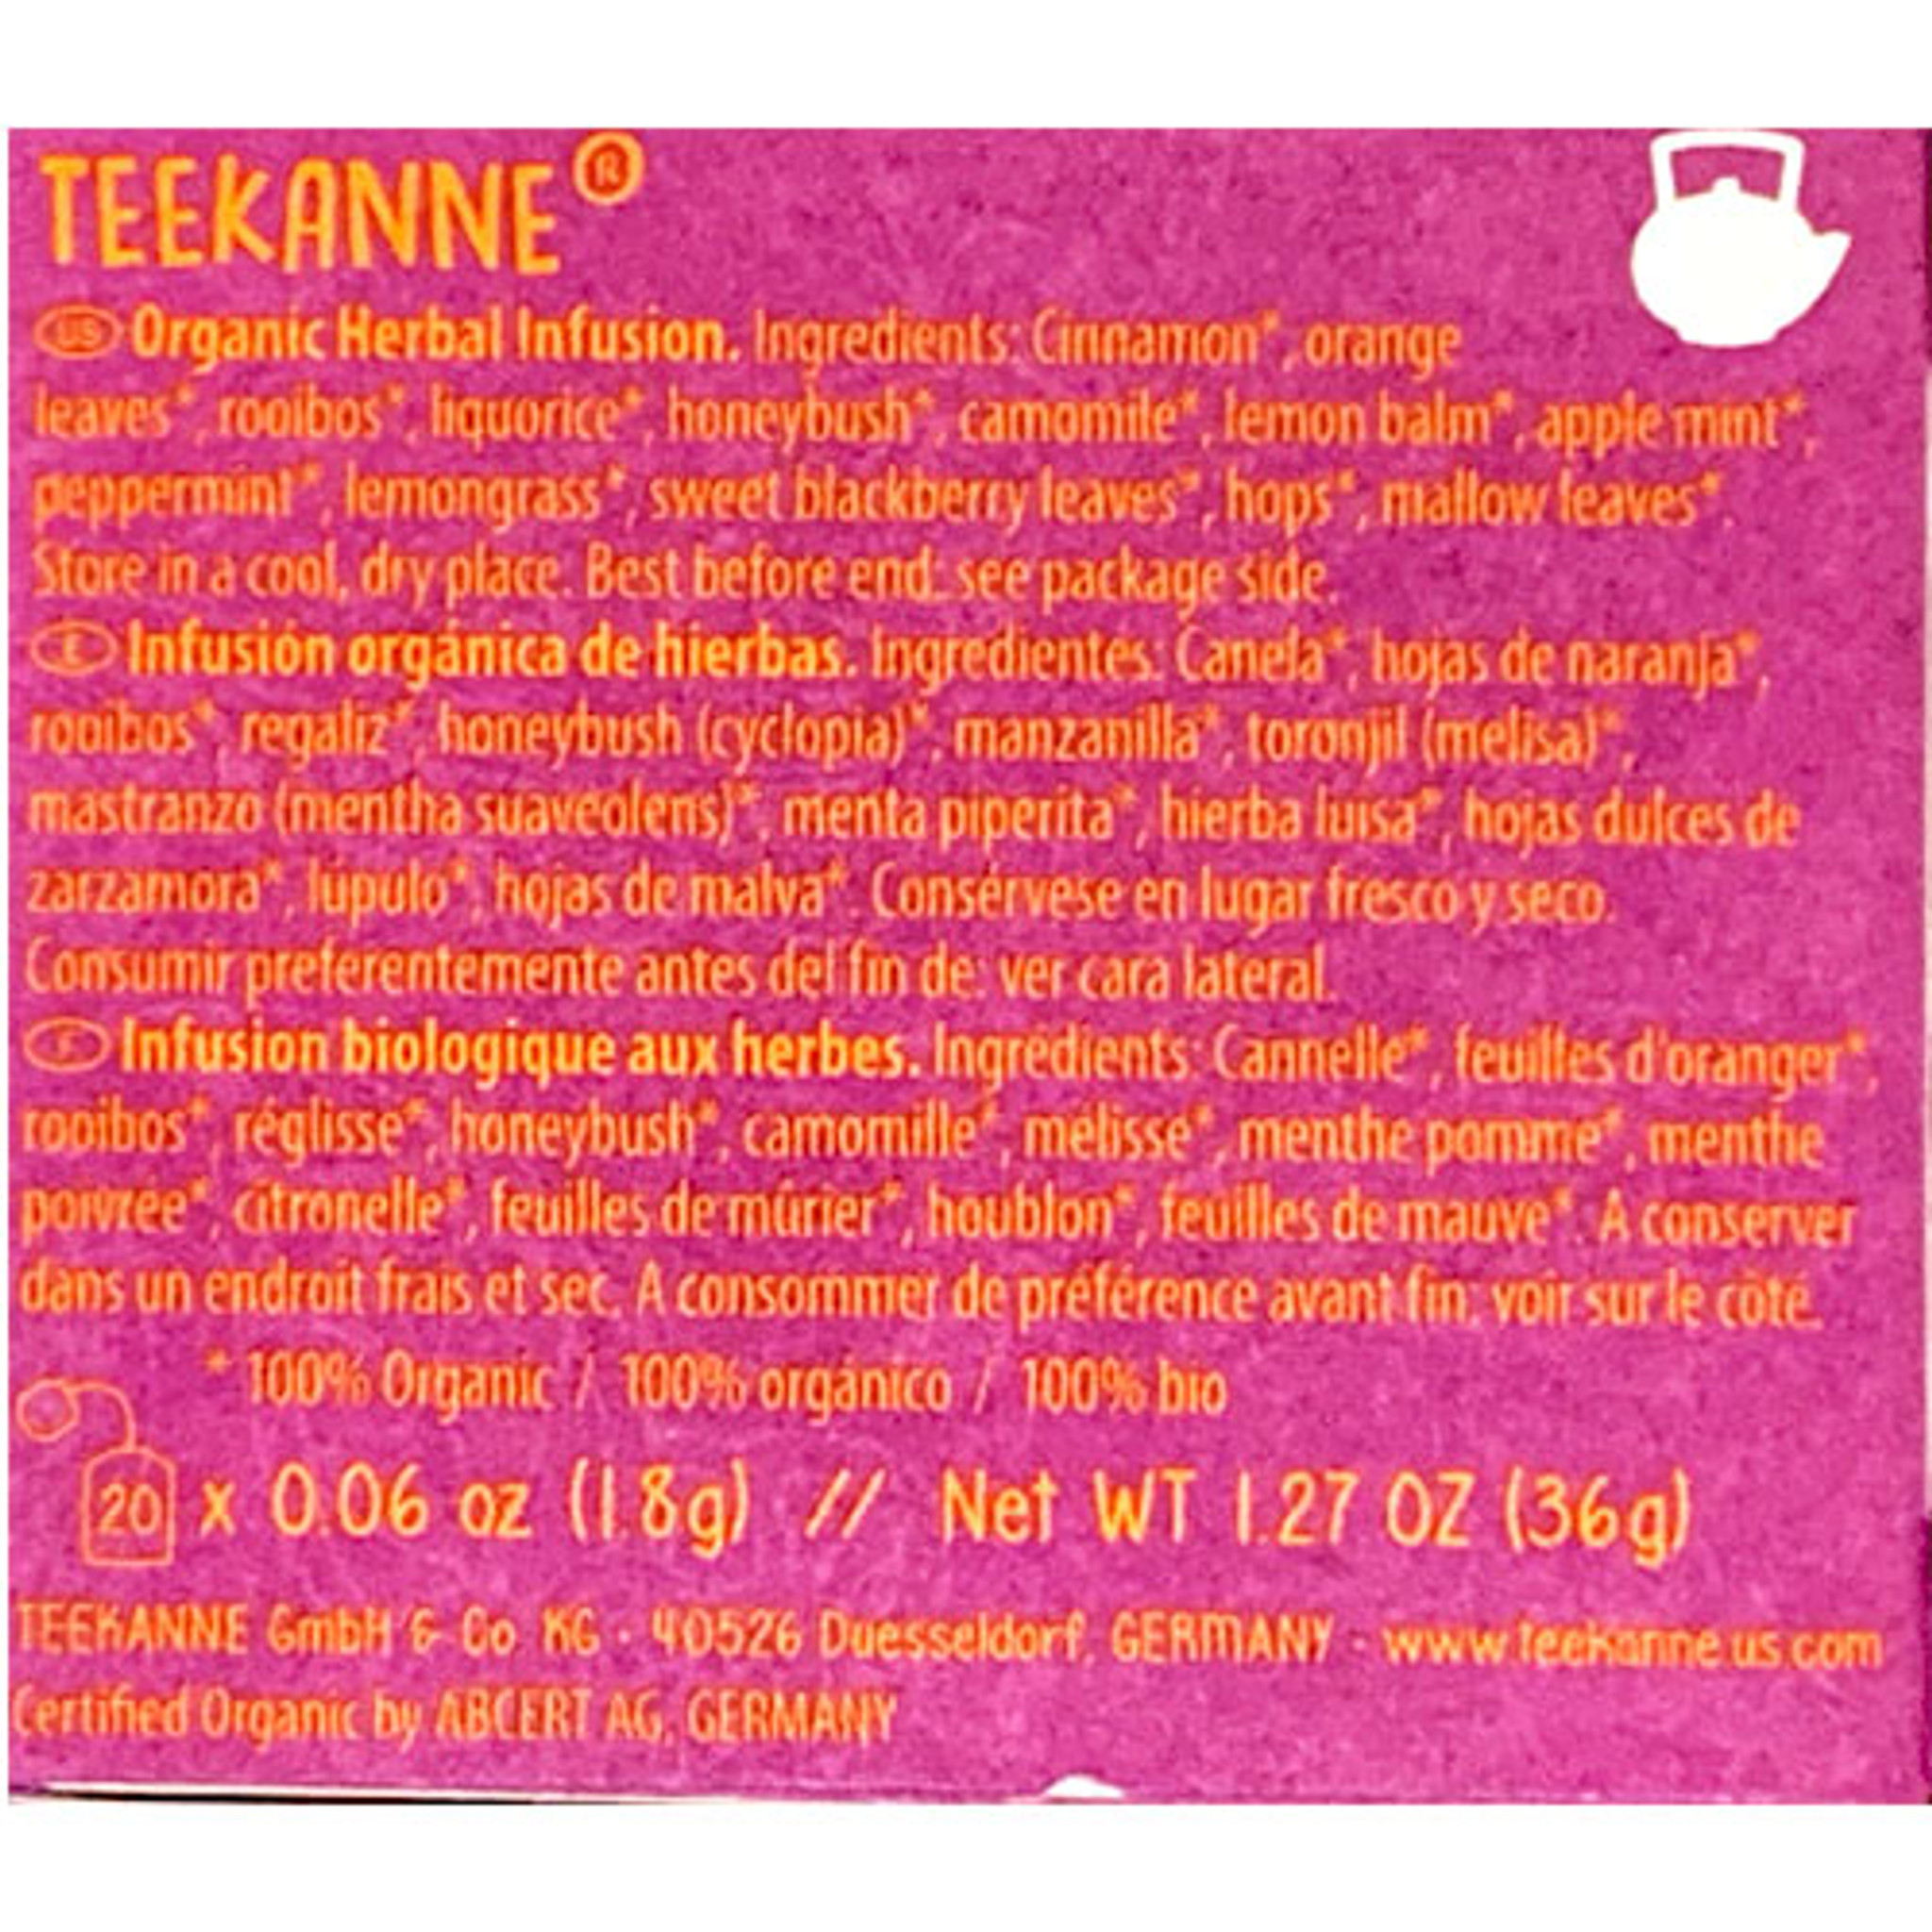 Teekanne "Calm and Relax" Organic Herbal and Fruit Tea Mix, 20 bags - The  Taste of Germany